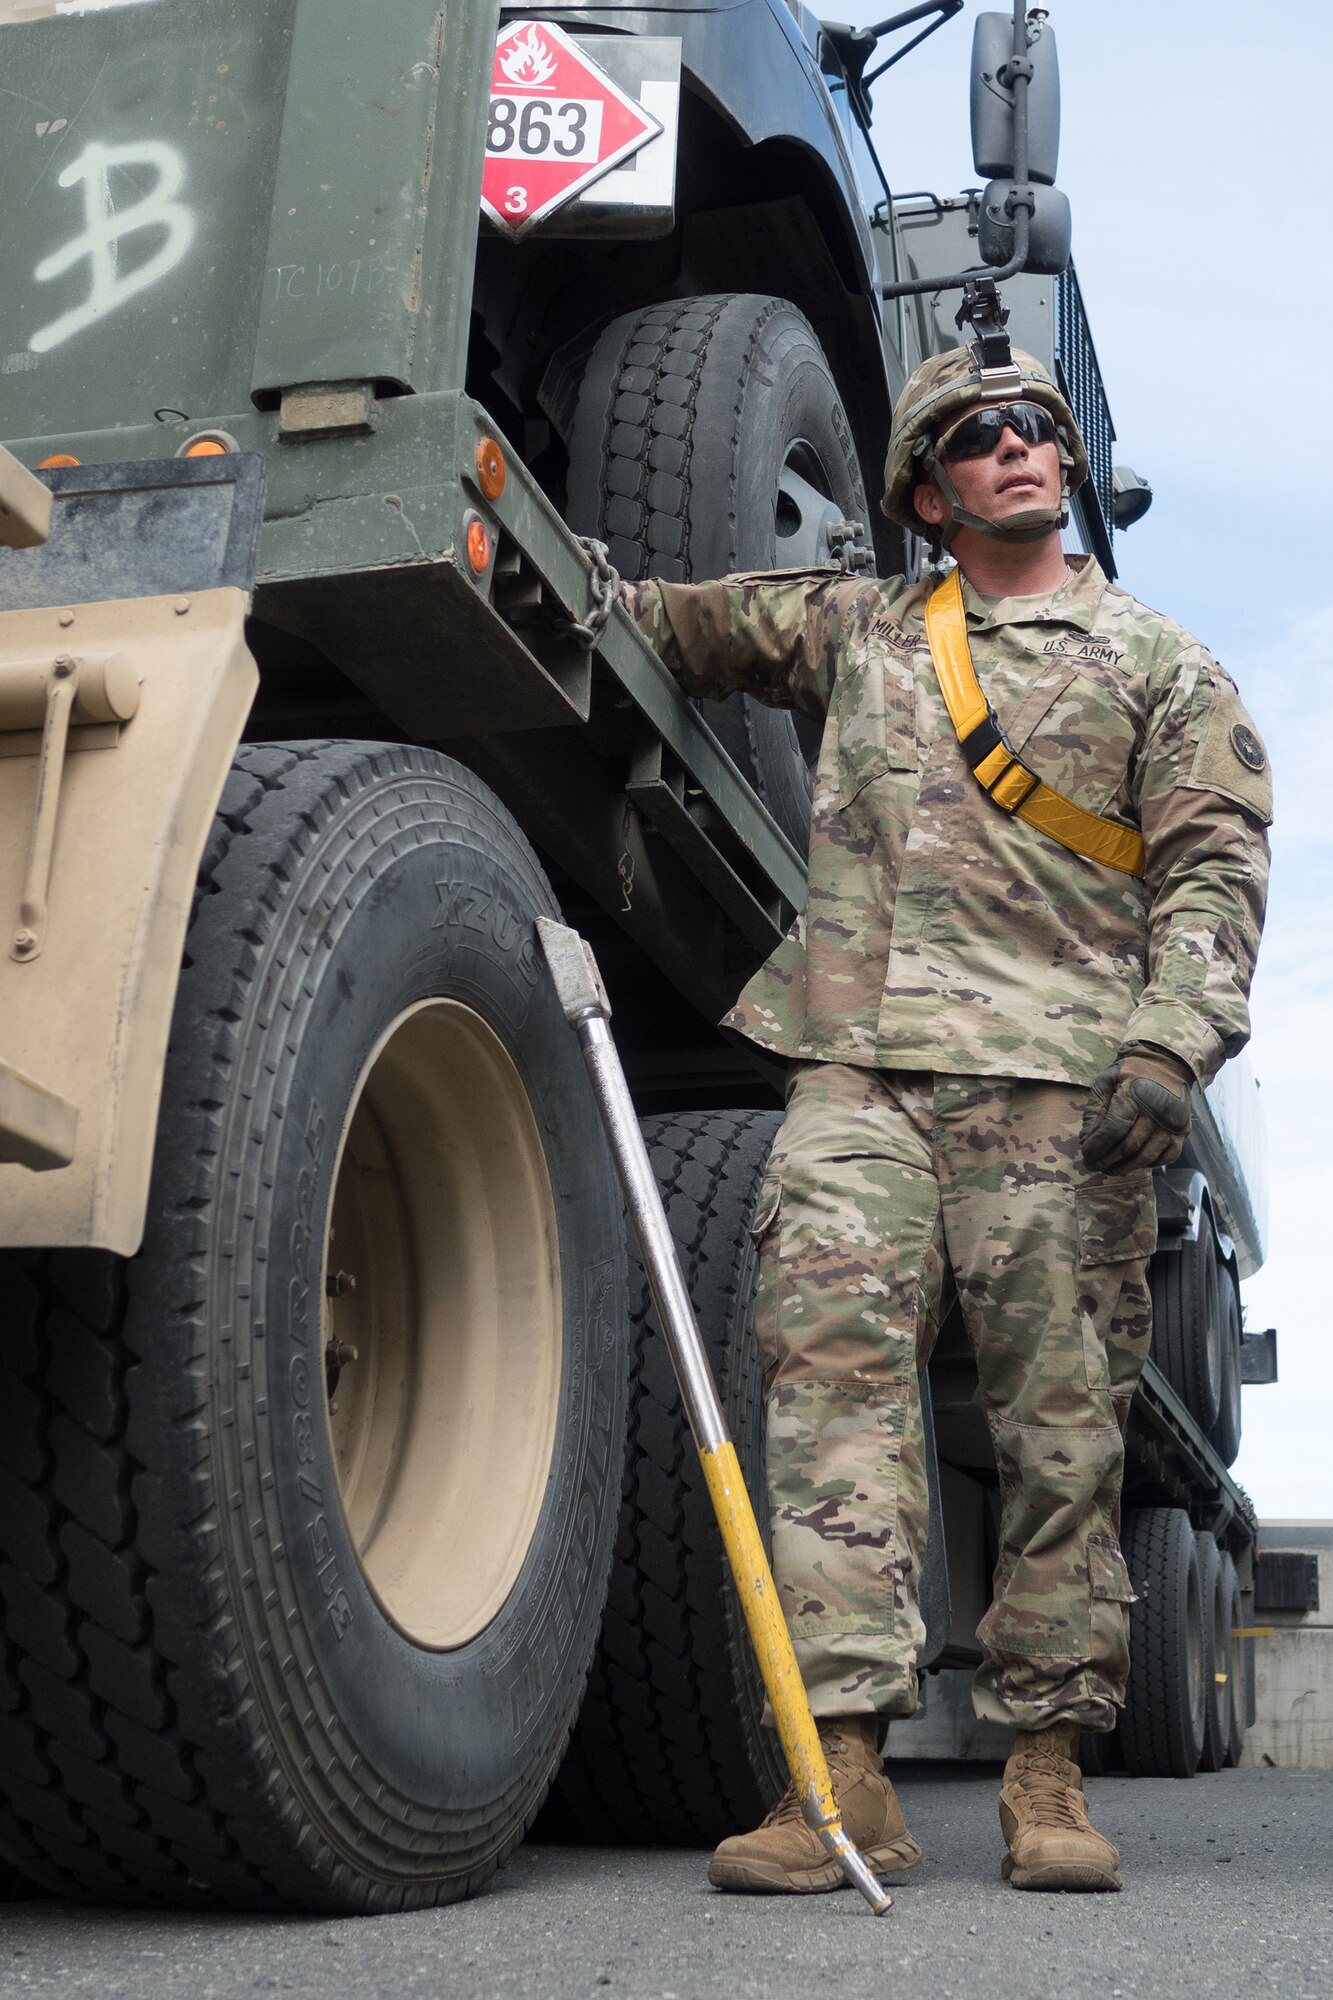 Army Staff Sgt. Luke Miller, a native of Honolulu, assigned to the 109th Transportation Company "Muleskinners", 17th Combat Sustainment Support Battalion, U.S. Army Alaska, takes a short break after loading vehicles and equipment onto a flat bed trailer on Joint Base Elmendorf-Richardson, Alaska, June 28, 2017, in support of a U.S. Air Force exercise. USARAK is at the forefront  of protecting America’s interests in the Asia-Pacific region, and is one of the U.S. military’s most centrally located power projection platforms that benefits from joint training opportunities.